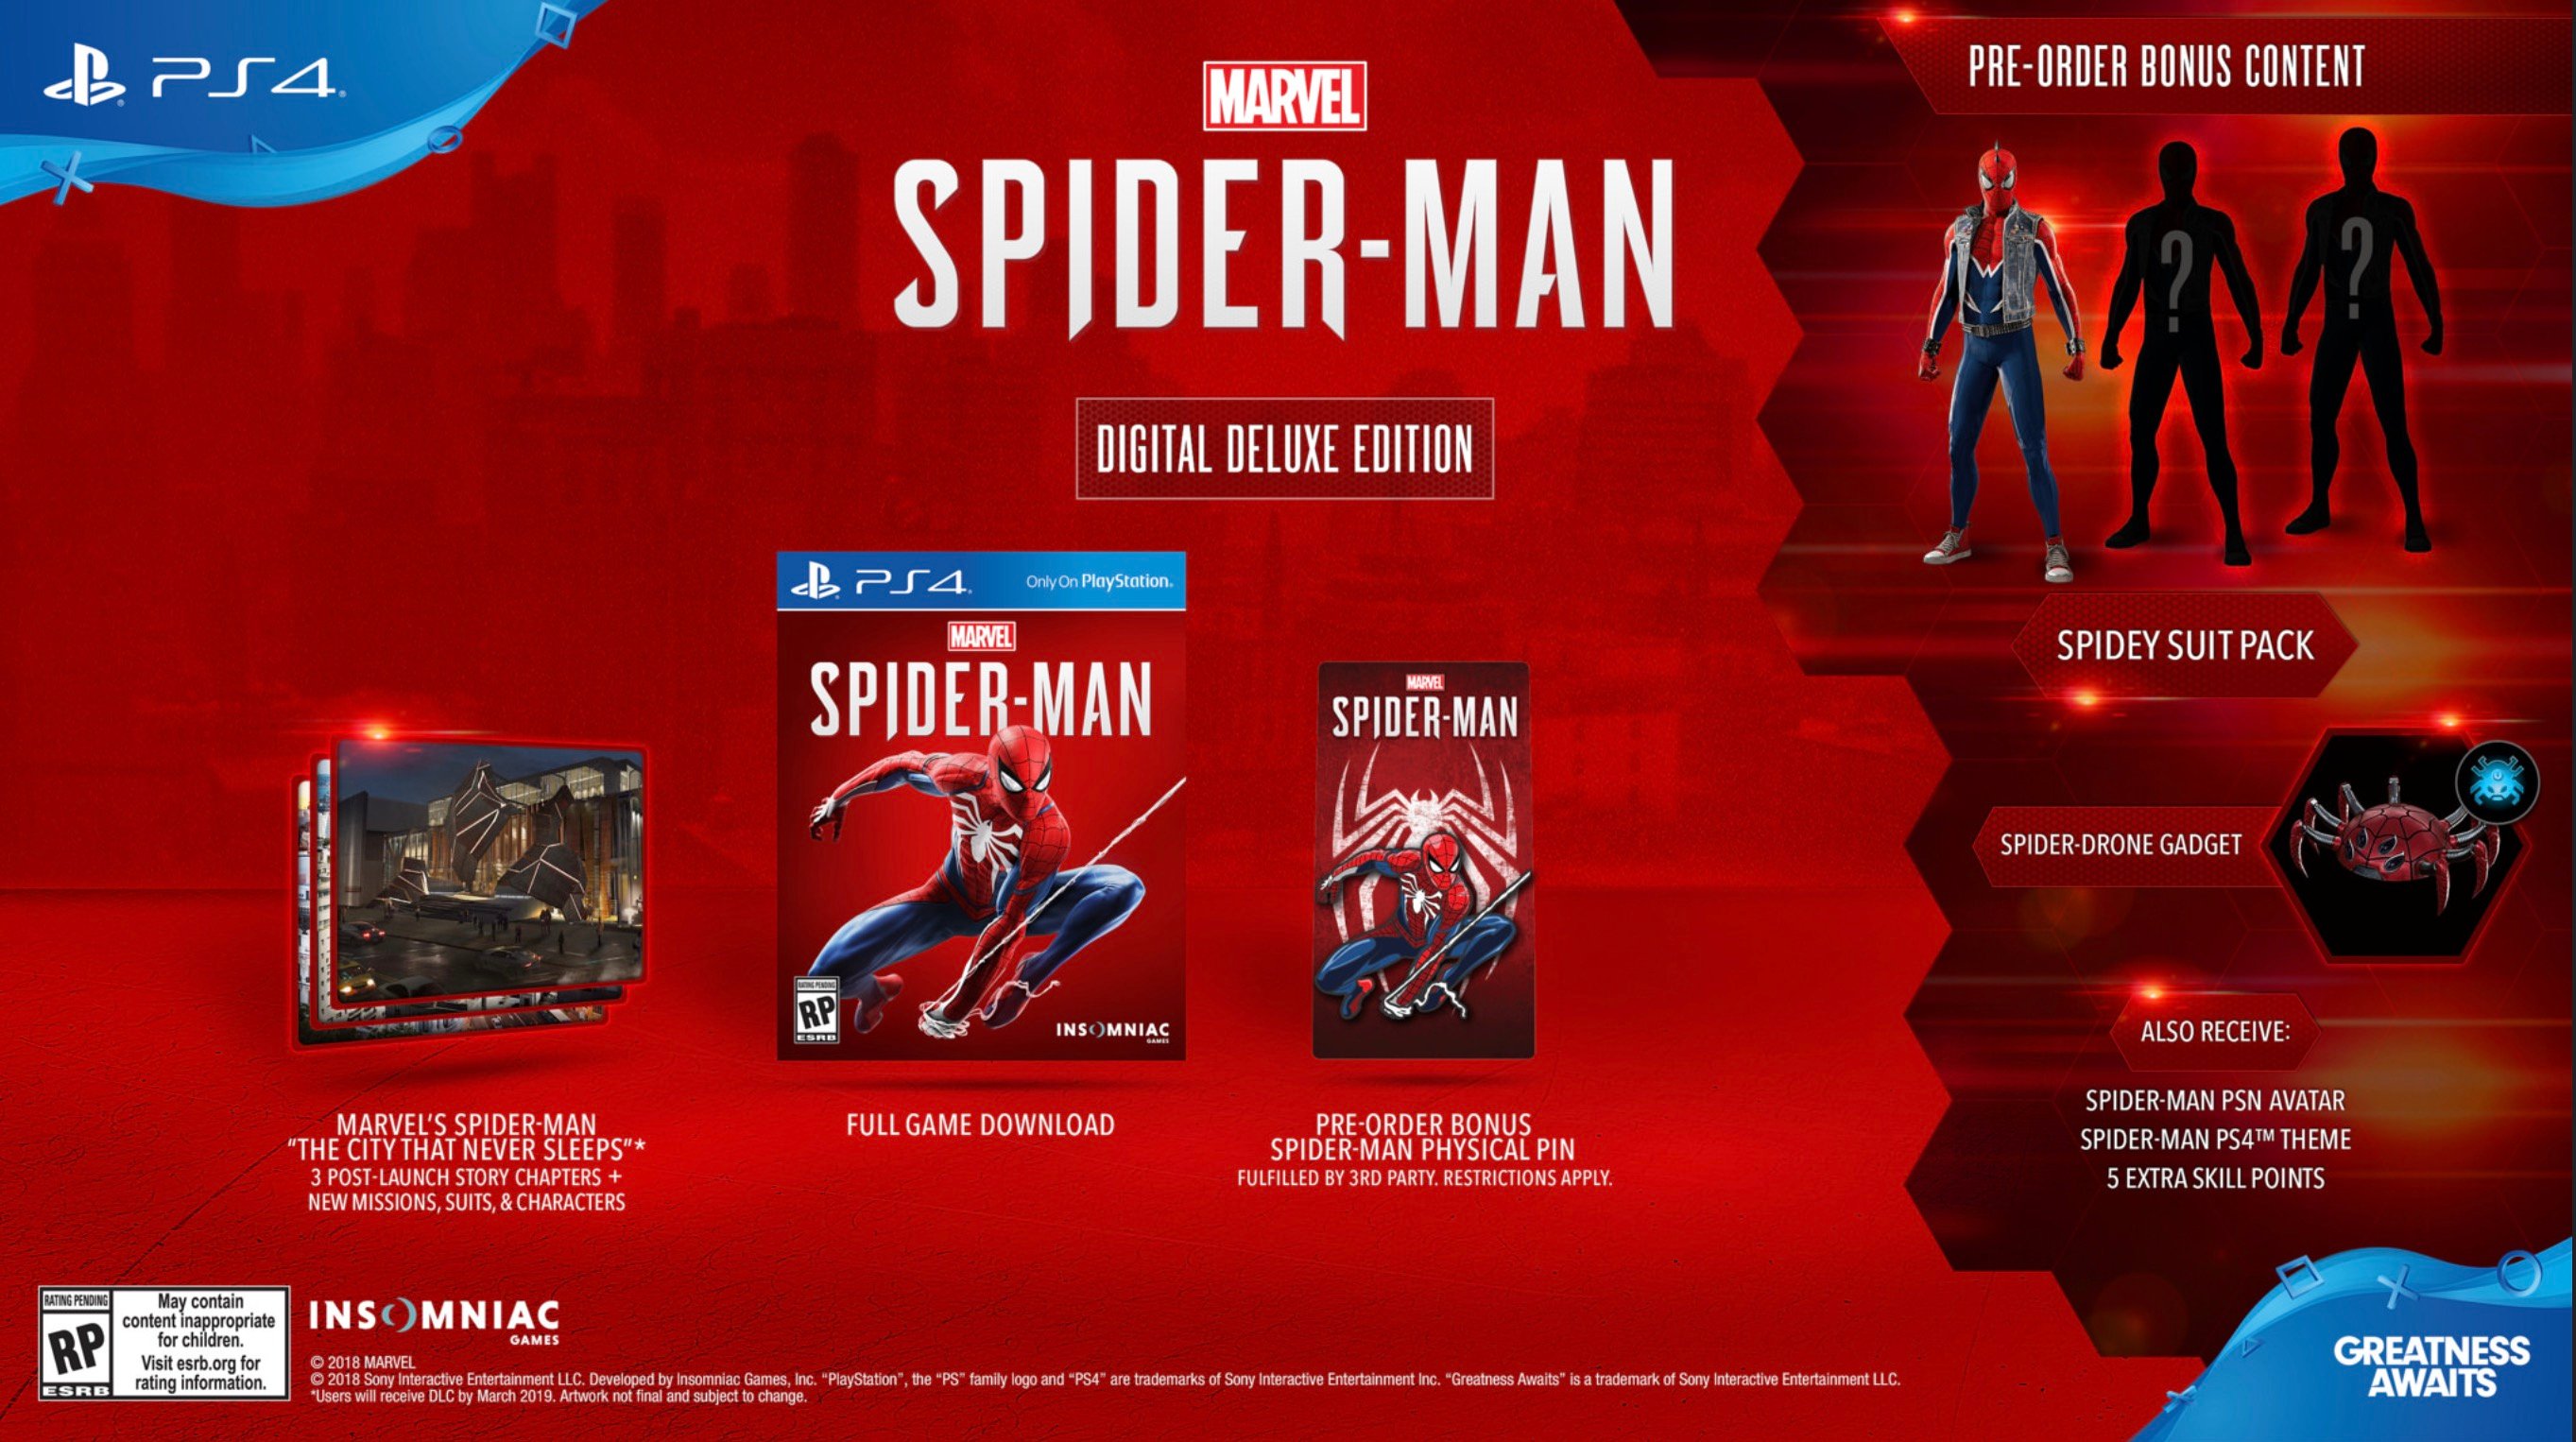 The Digital Deluxe Spider-Man edition for PS4 is a good deal for many buyers who want the DLC.